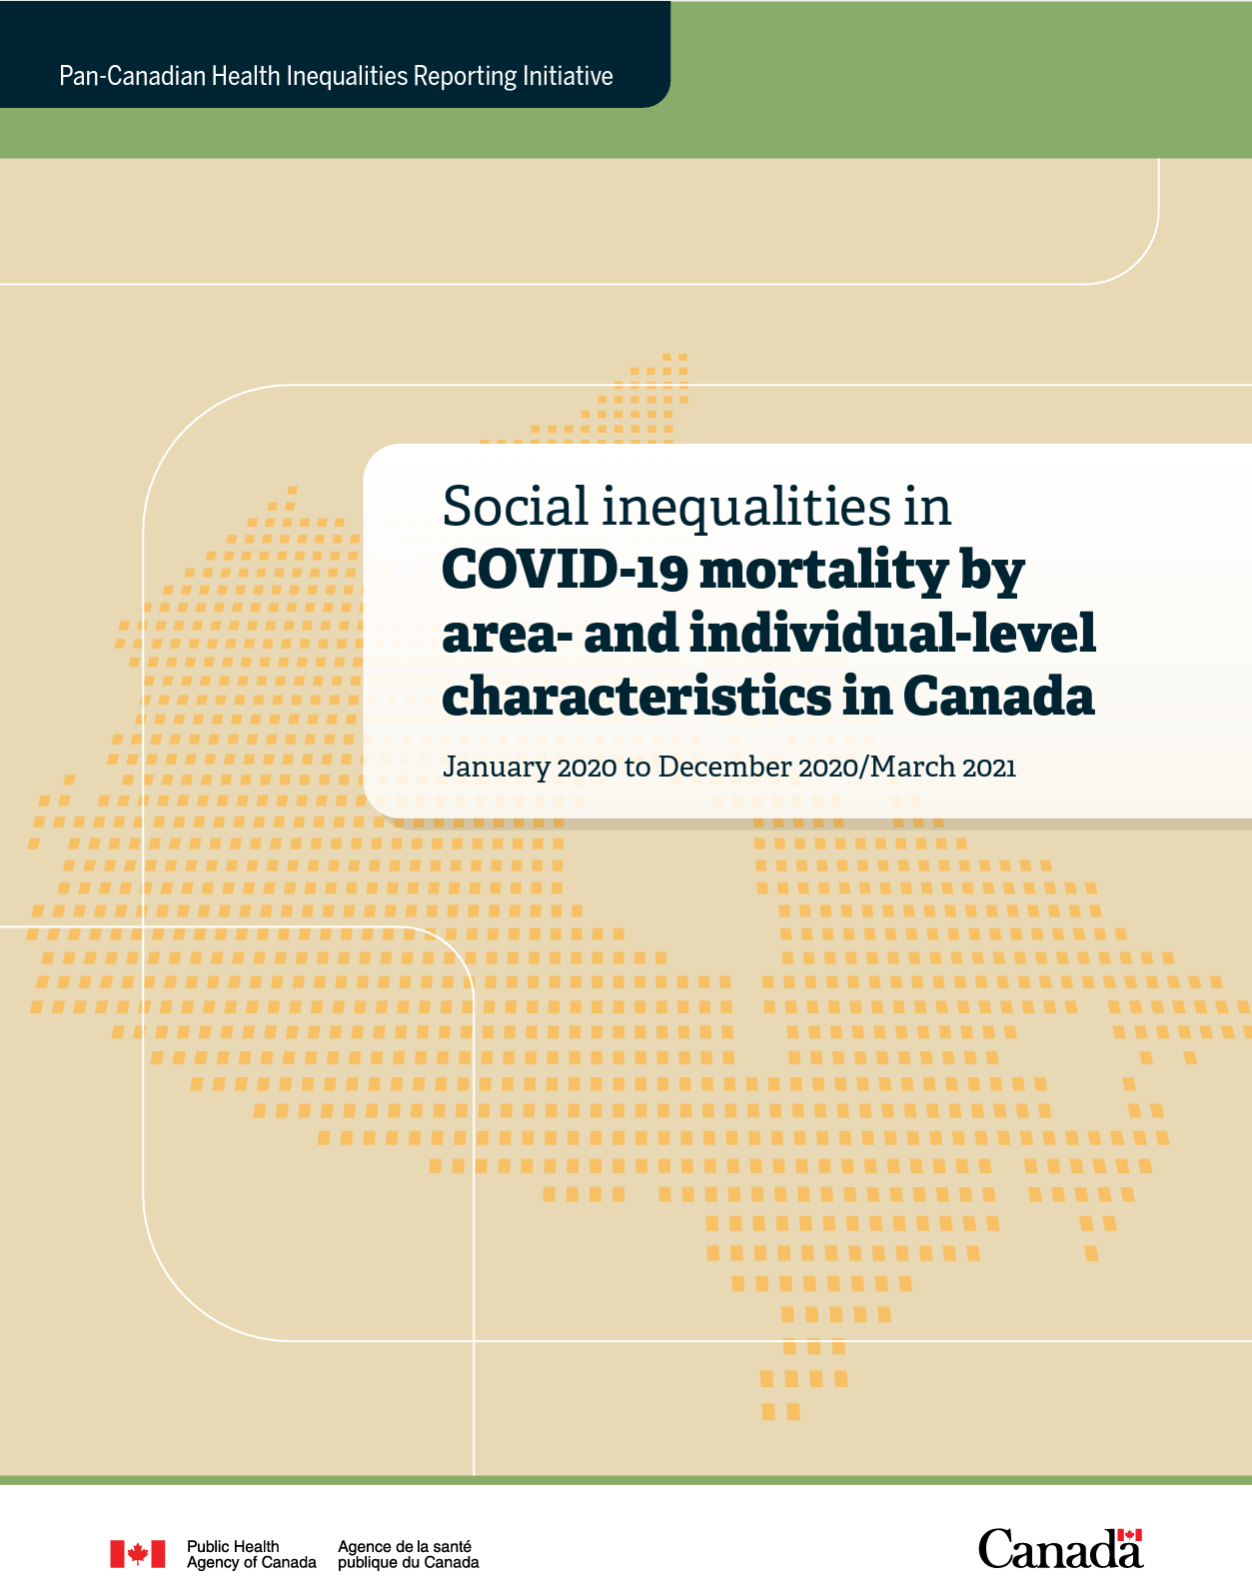 Social inequalities in COVID-19 mortality by area- and individual-level characteristics in Canada – January 2020 to December 2020/March 2021